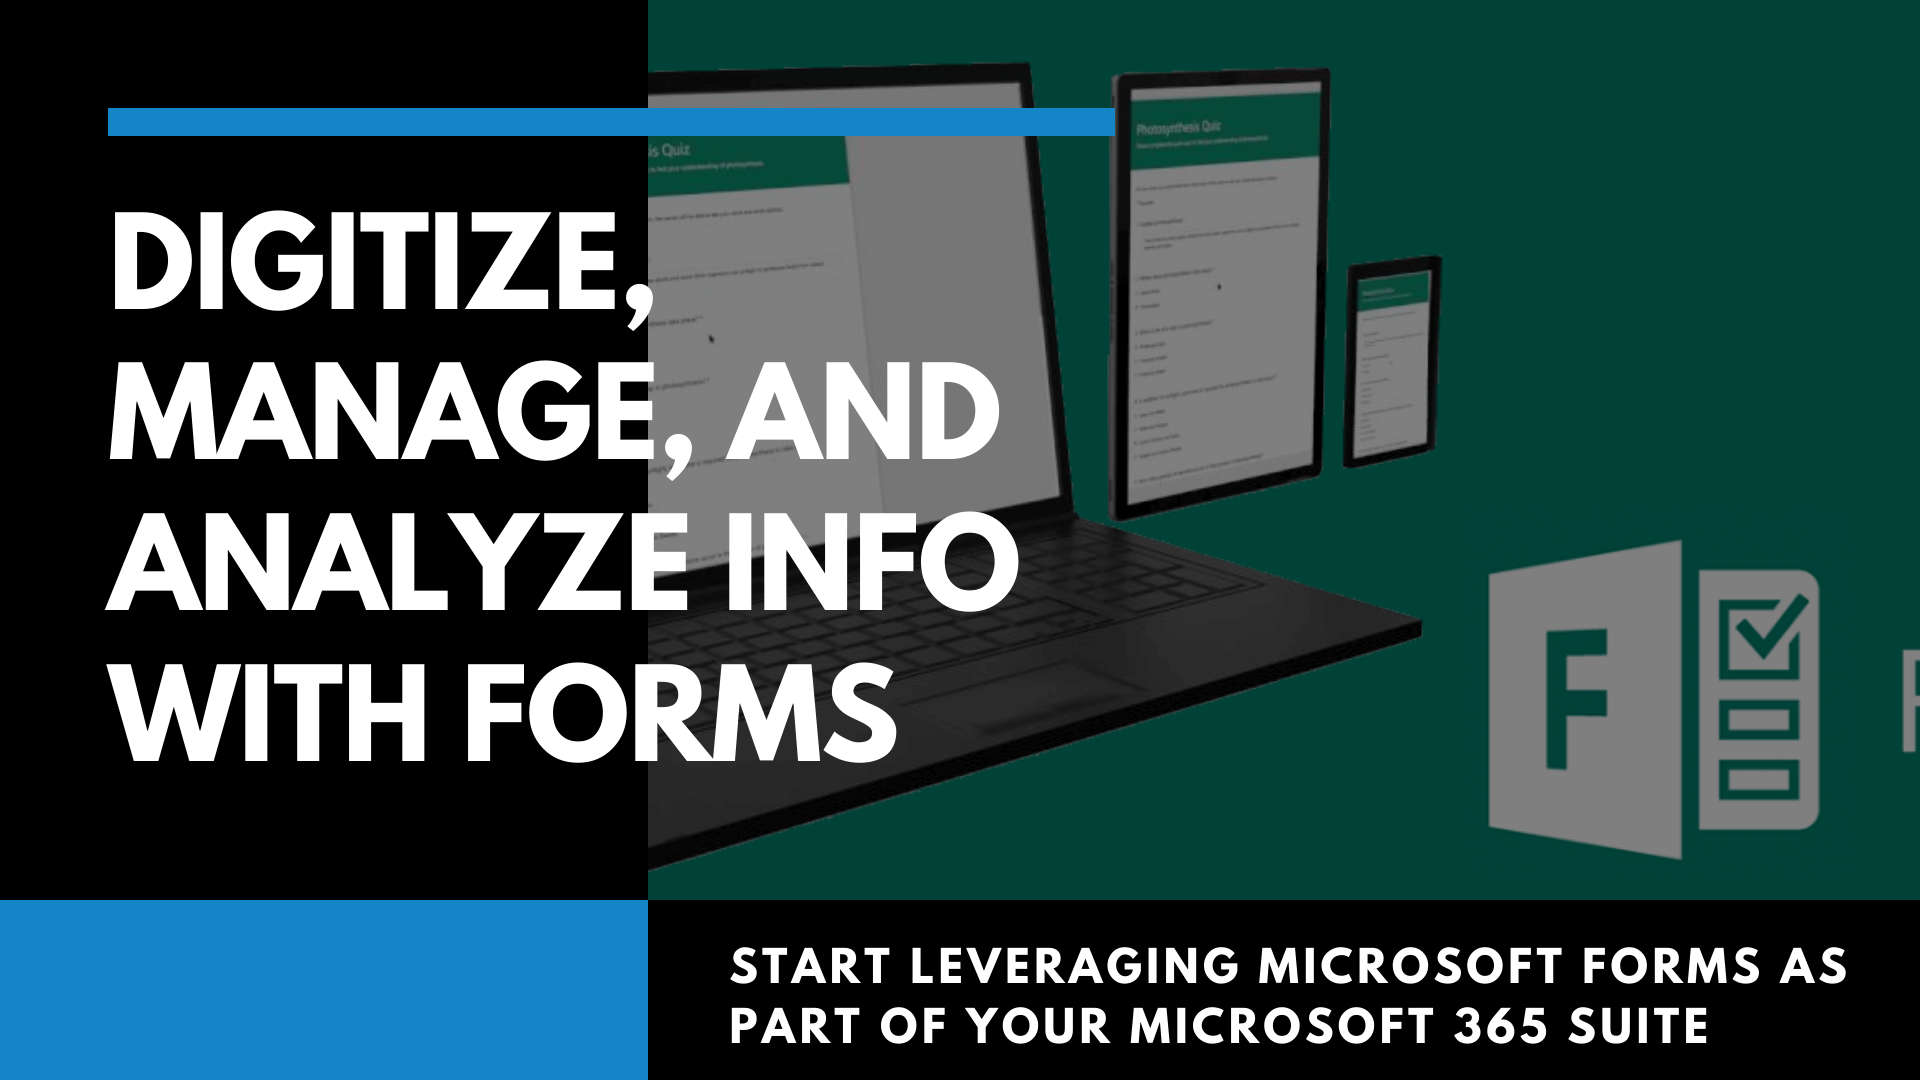 Graphic saying, "Digitize, Manage, and Analyze Info With Forms"